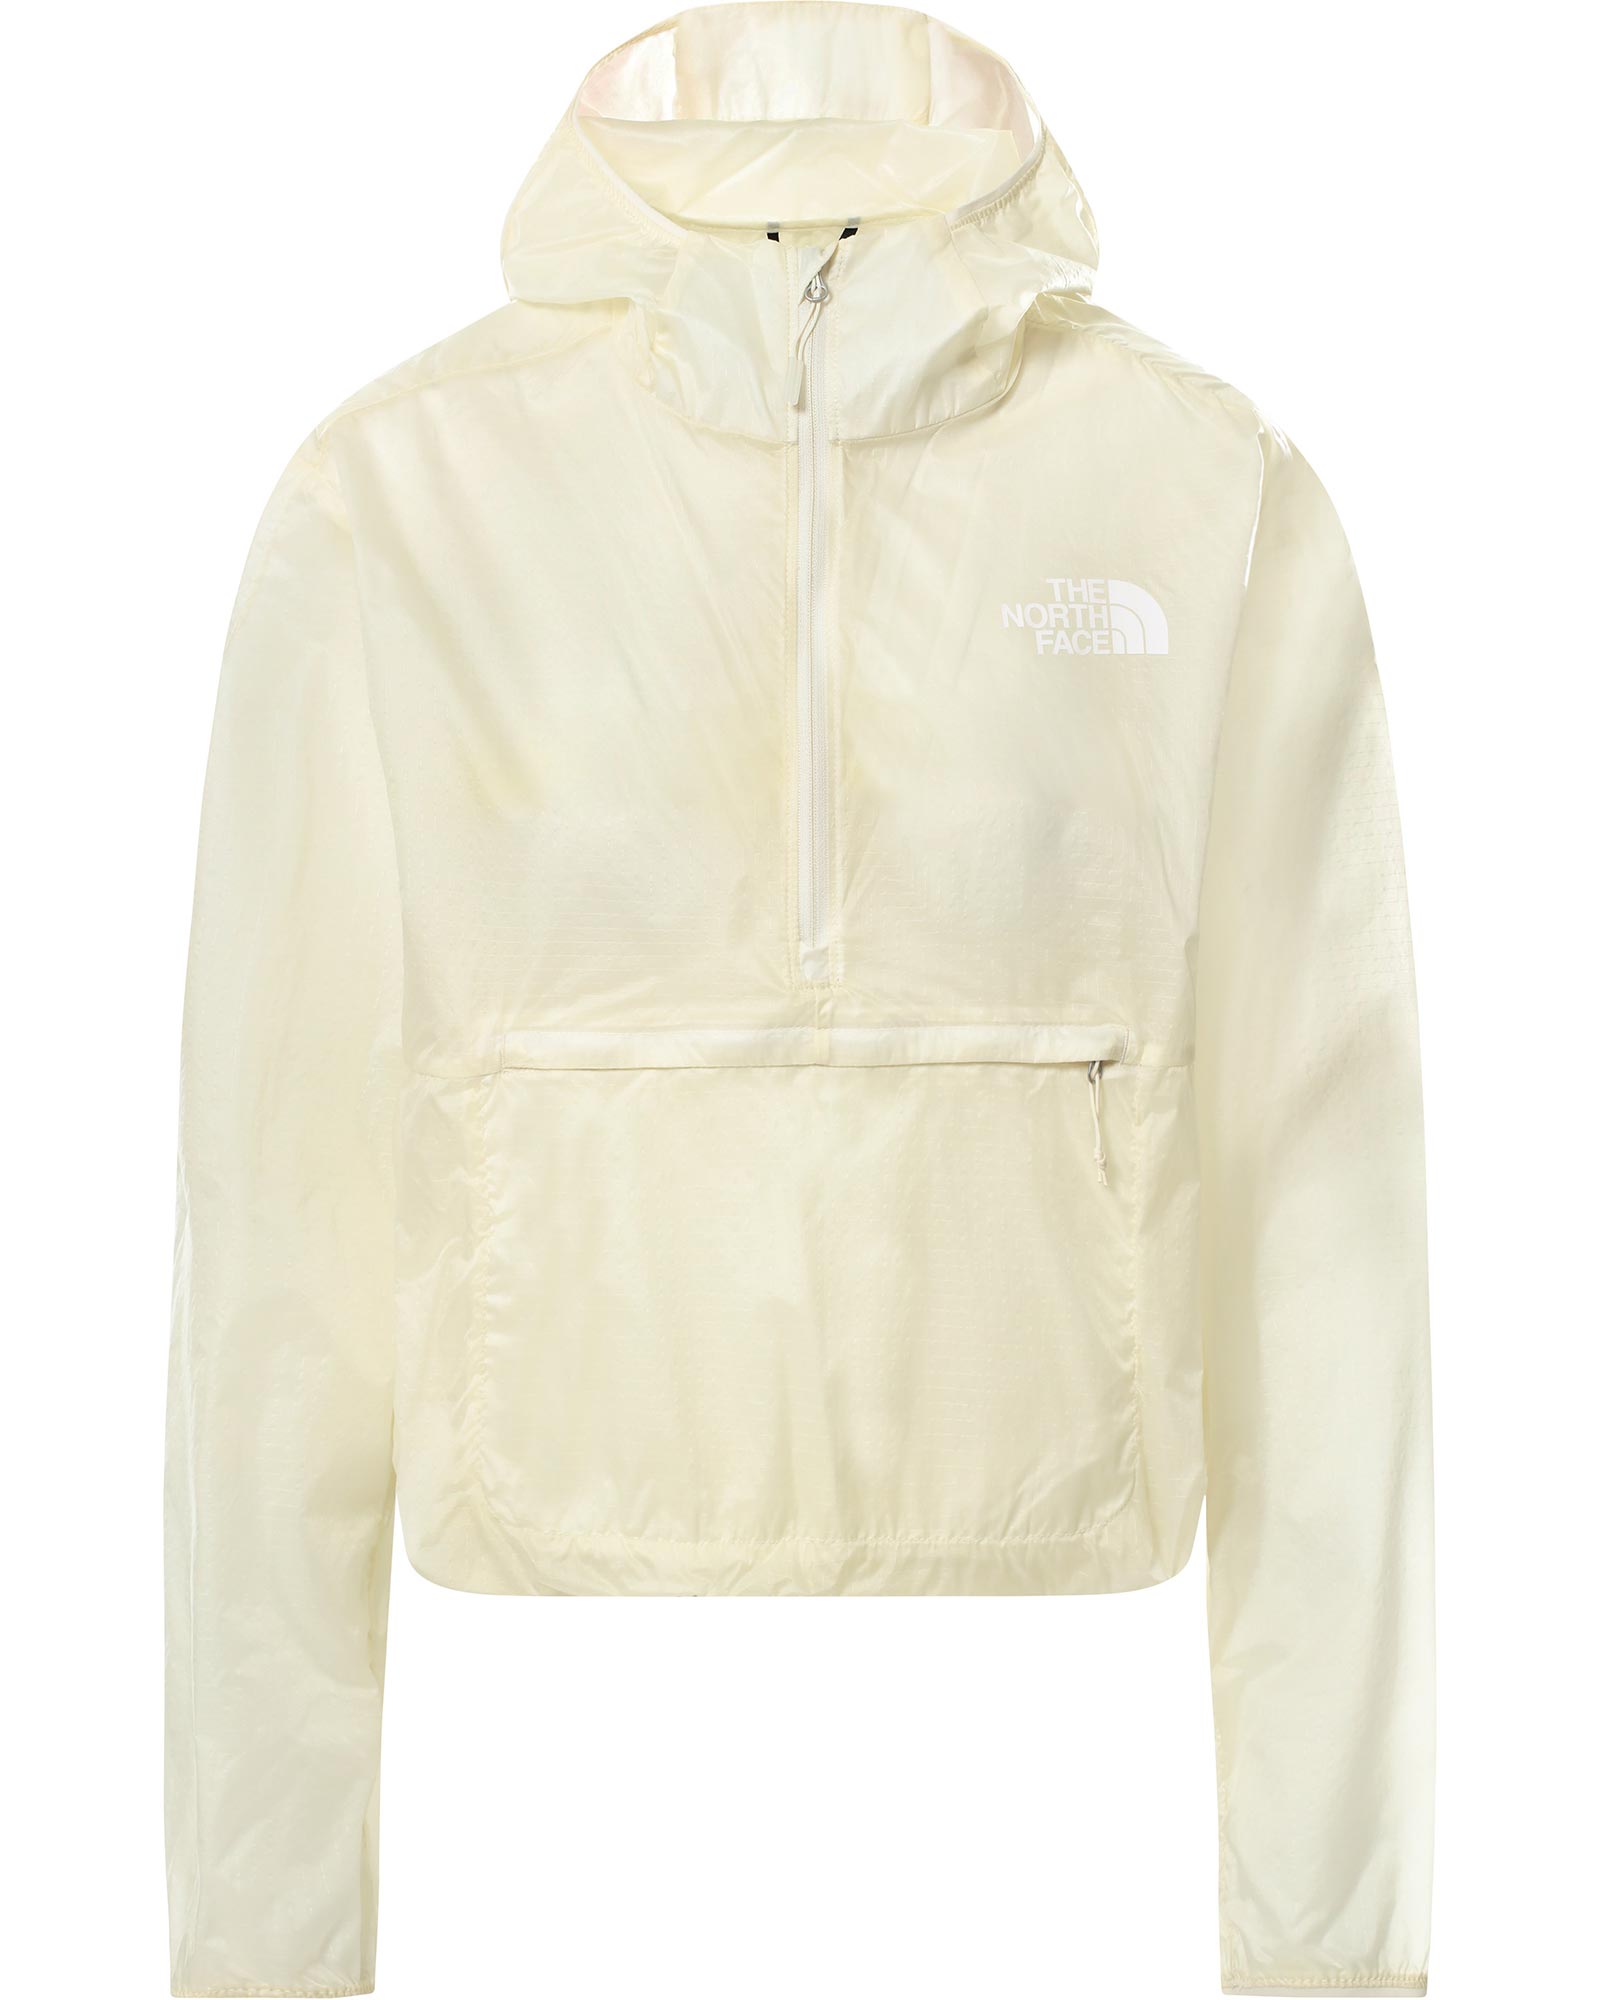 The North Face Windy Peak Womens Jacket